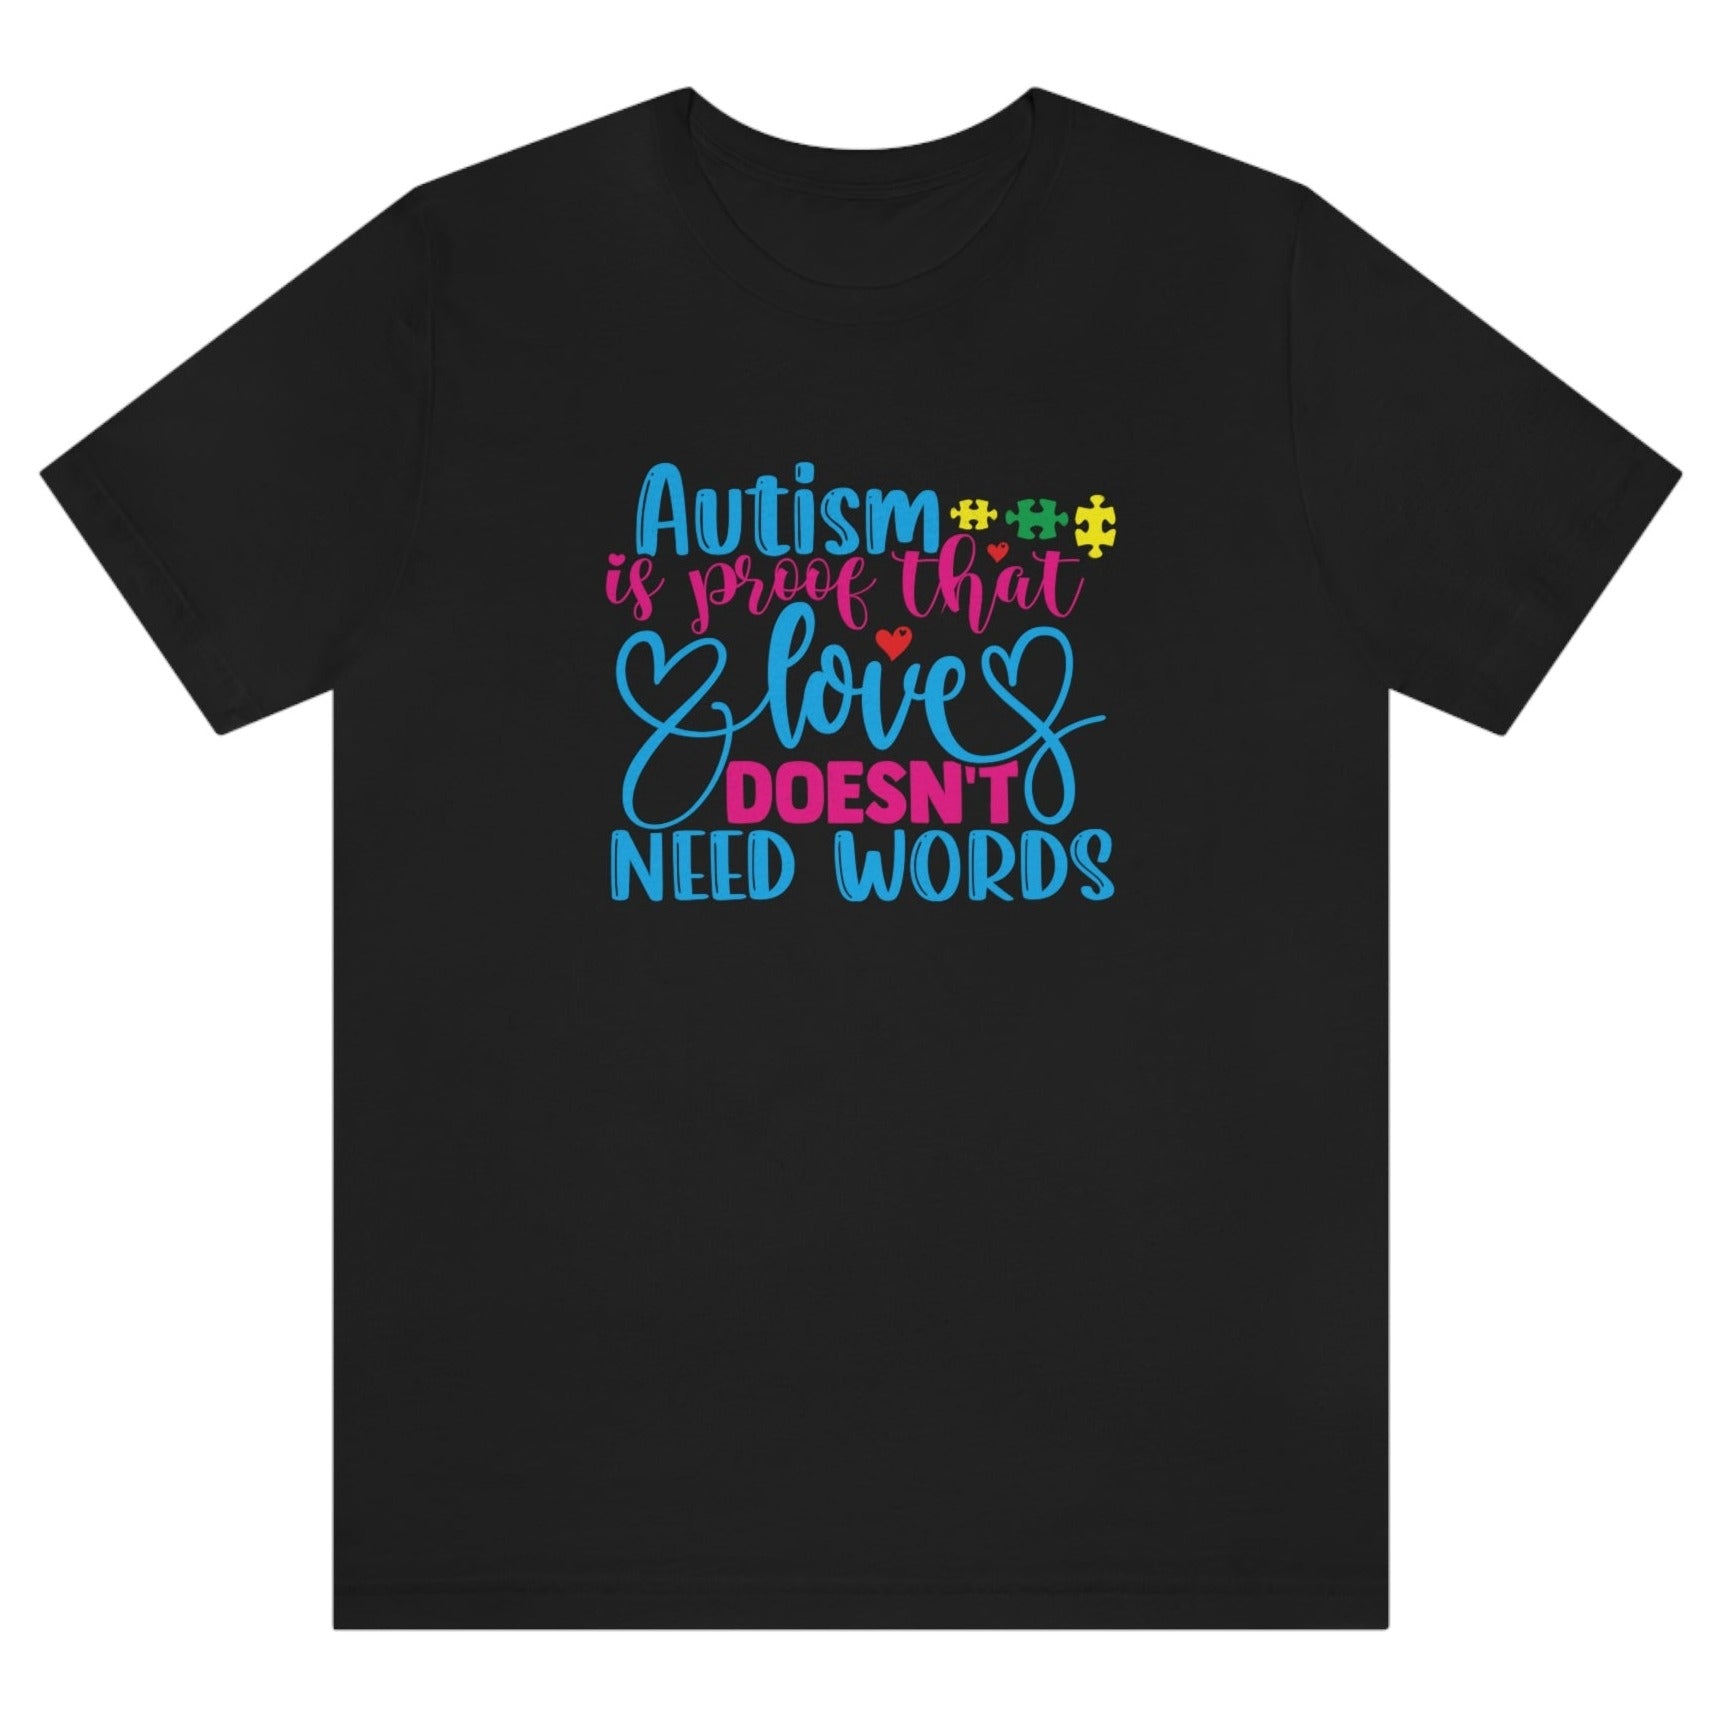 autism-is-proof-that-love-doesnt-need-words-black-t-shirt-awareness